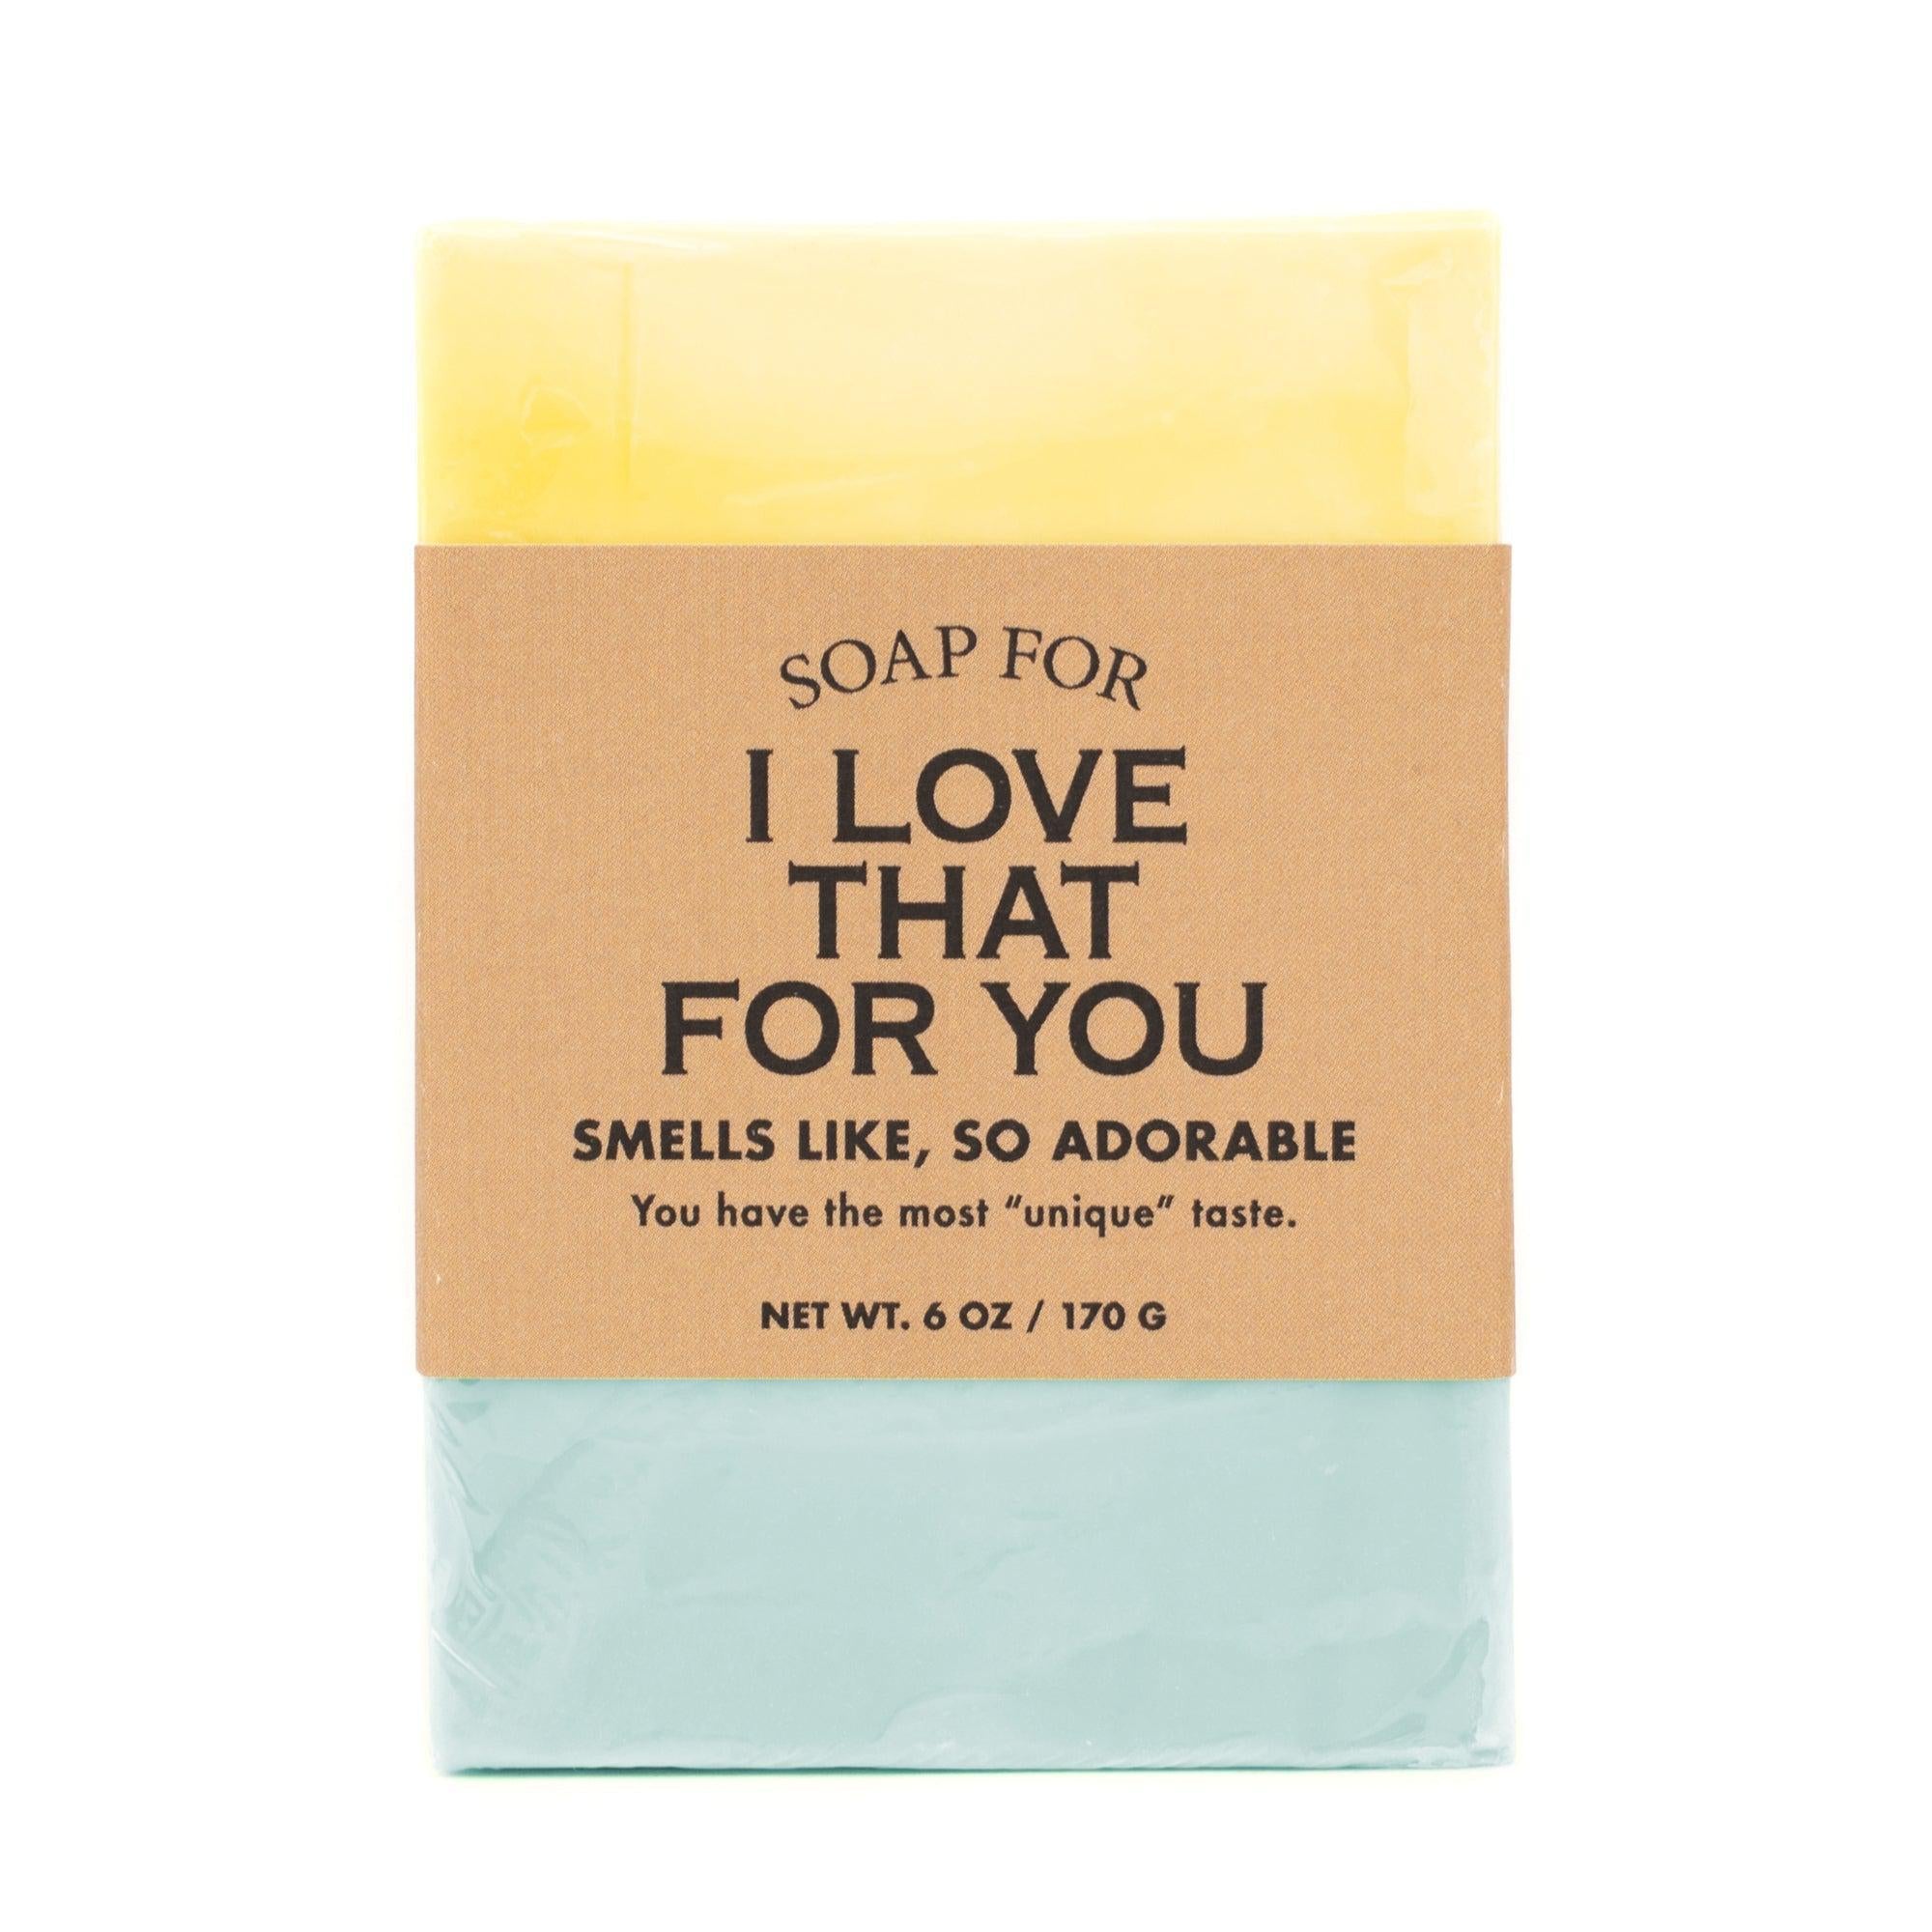 A Soap For I Love You For That